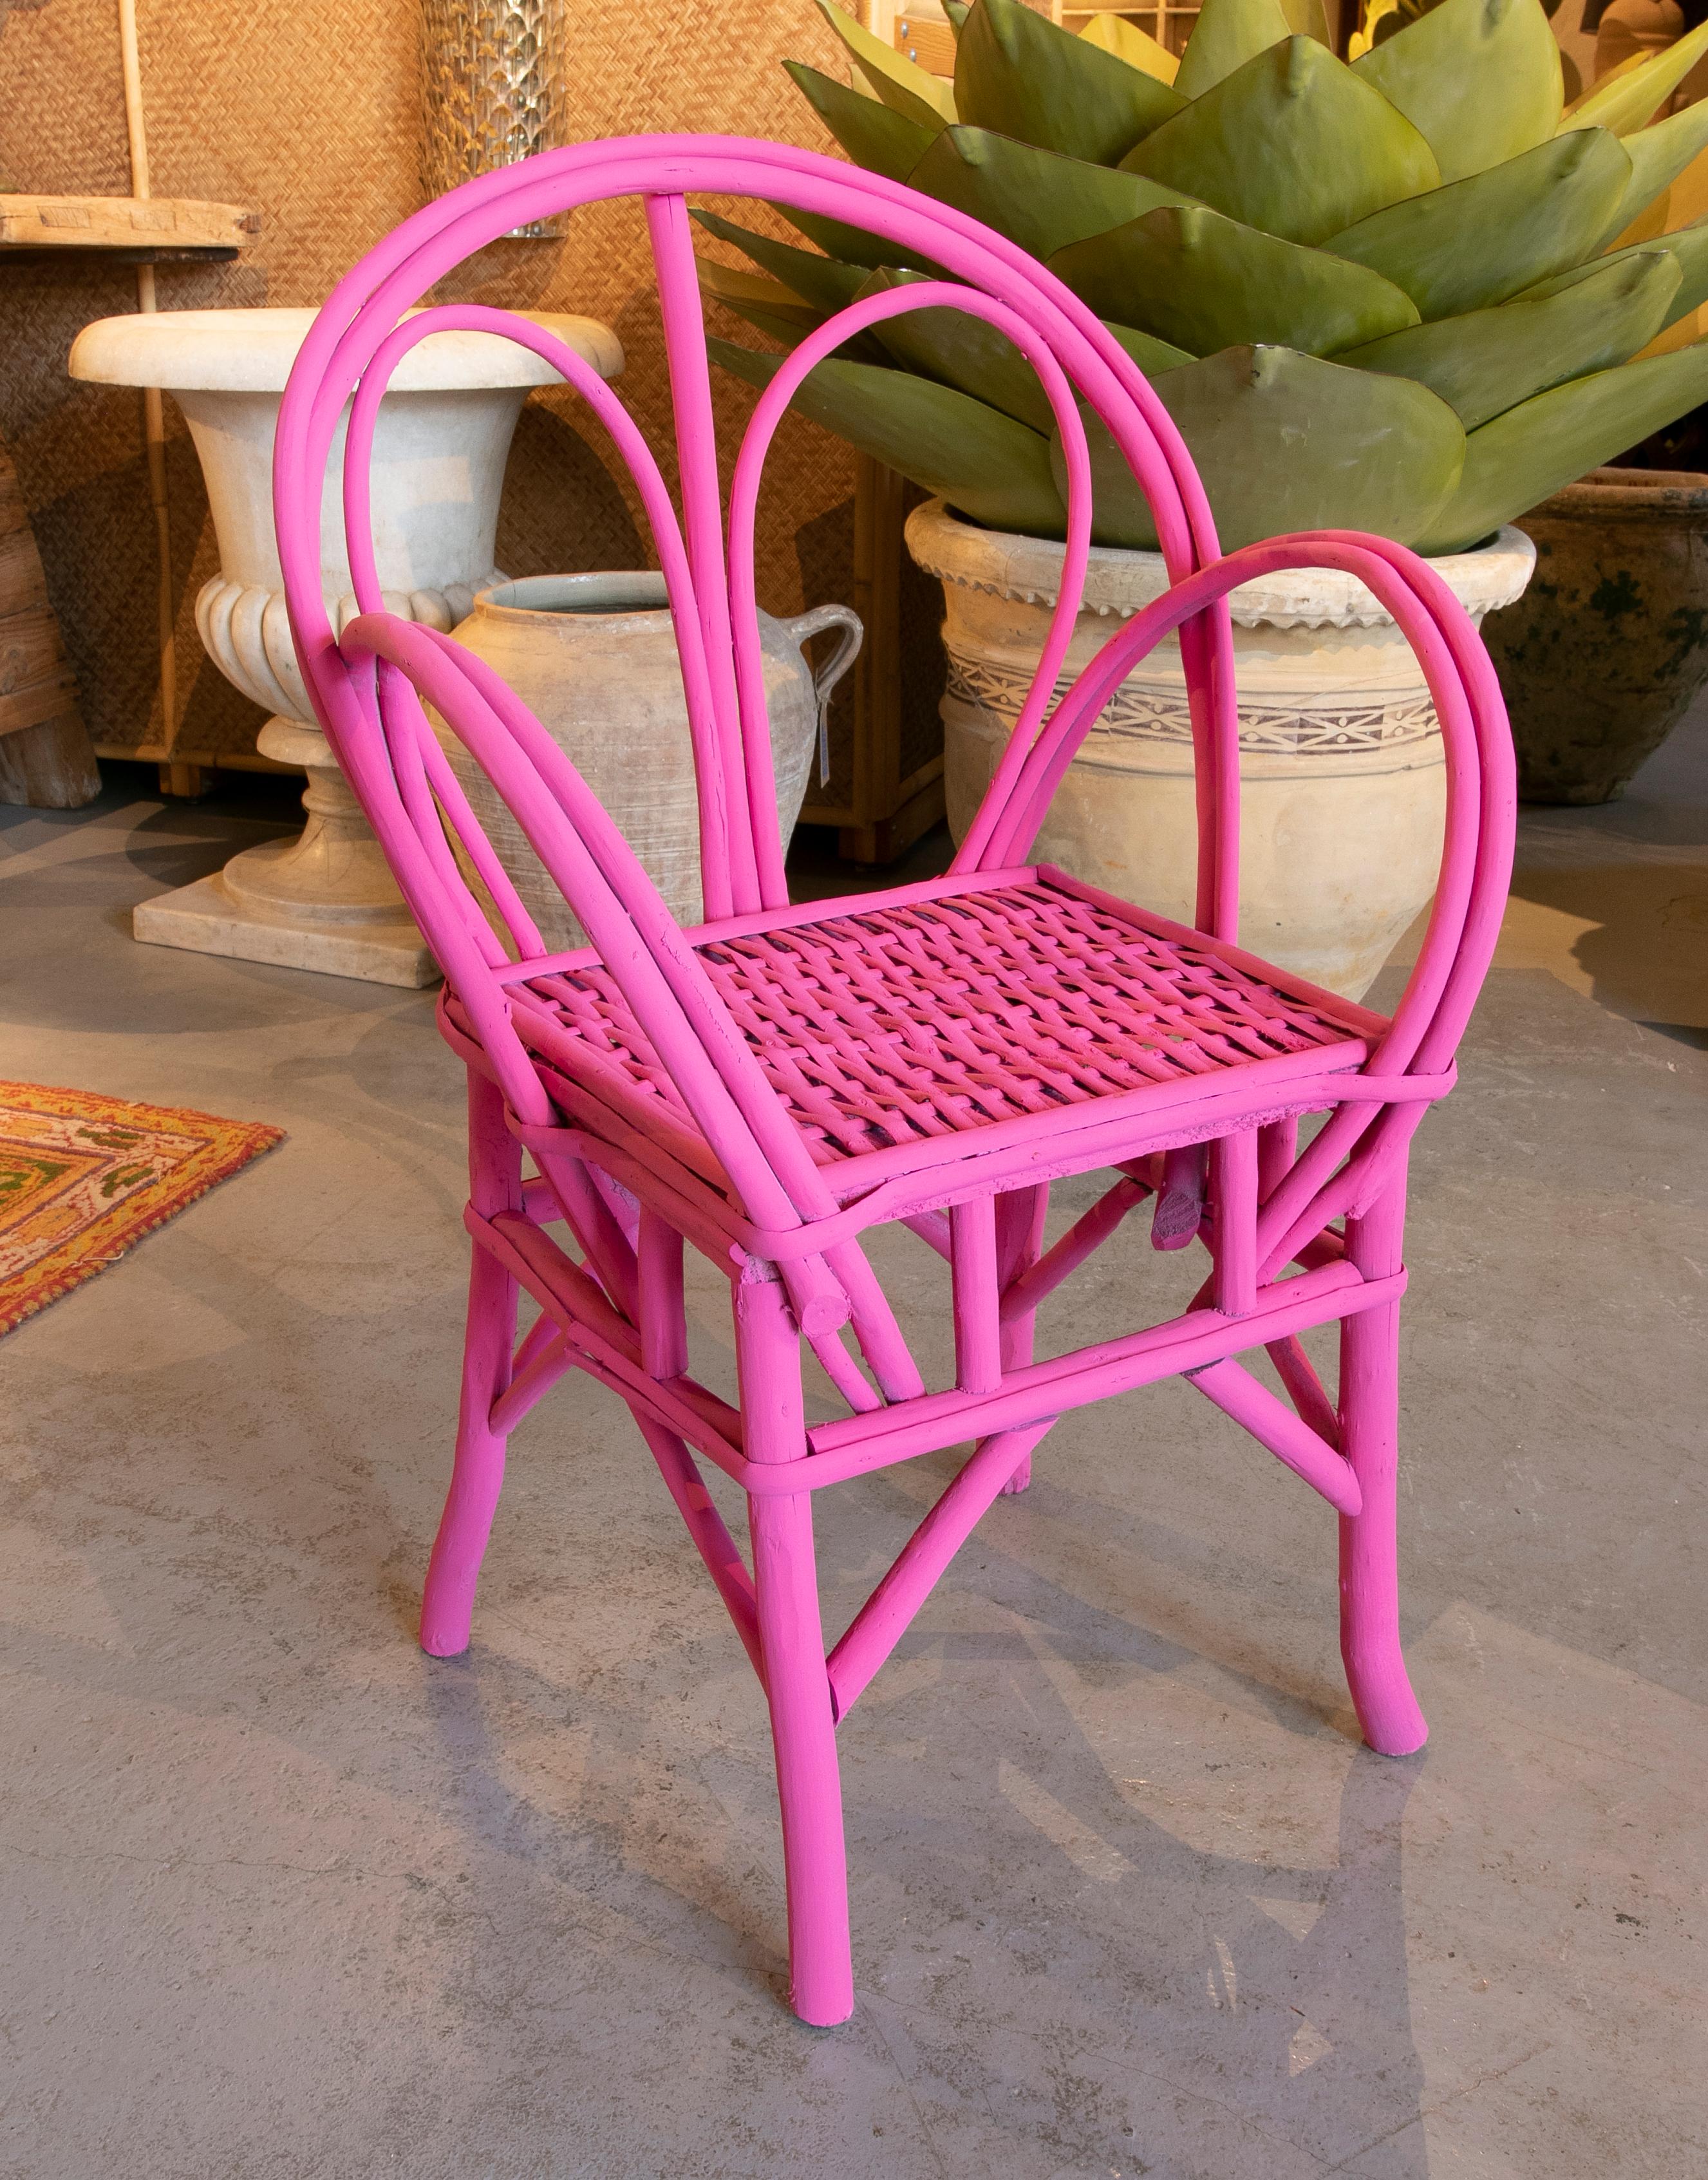 1950s Set of four wooden chairs painted in pink.